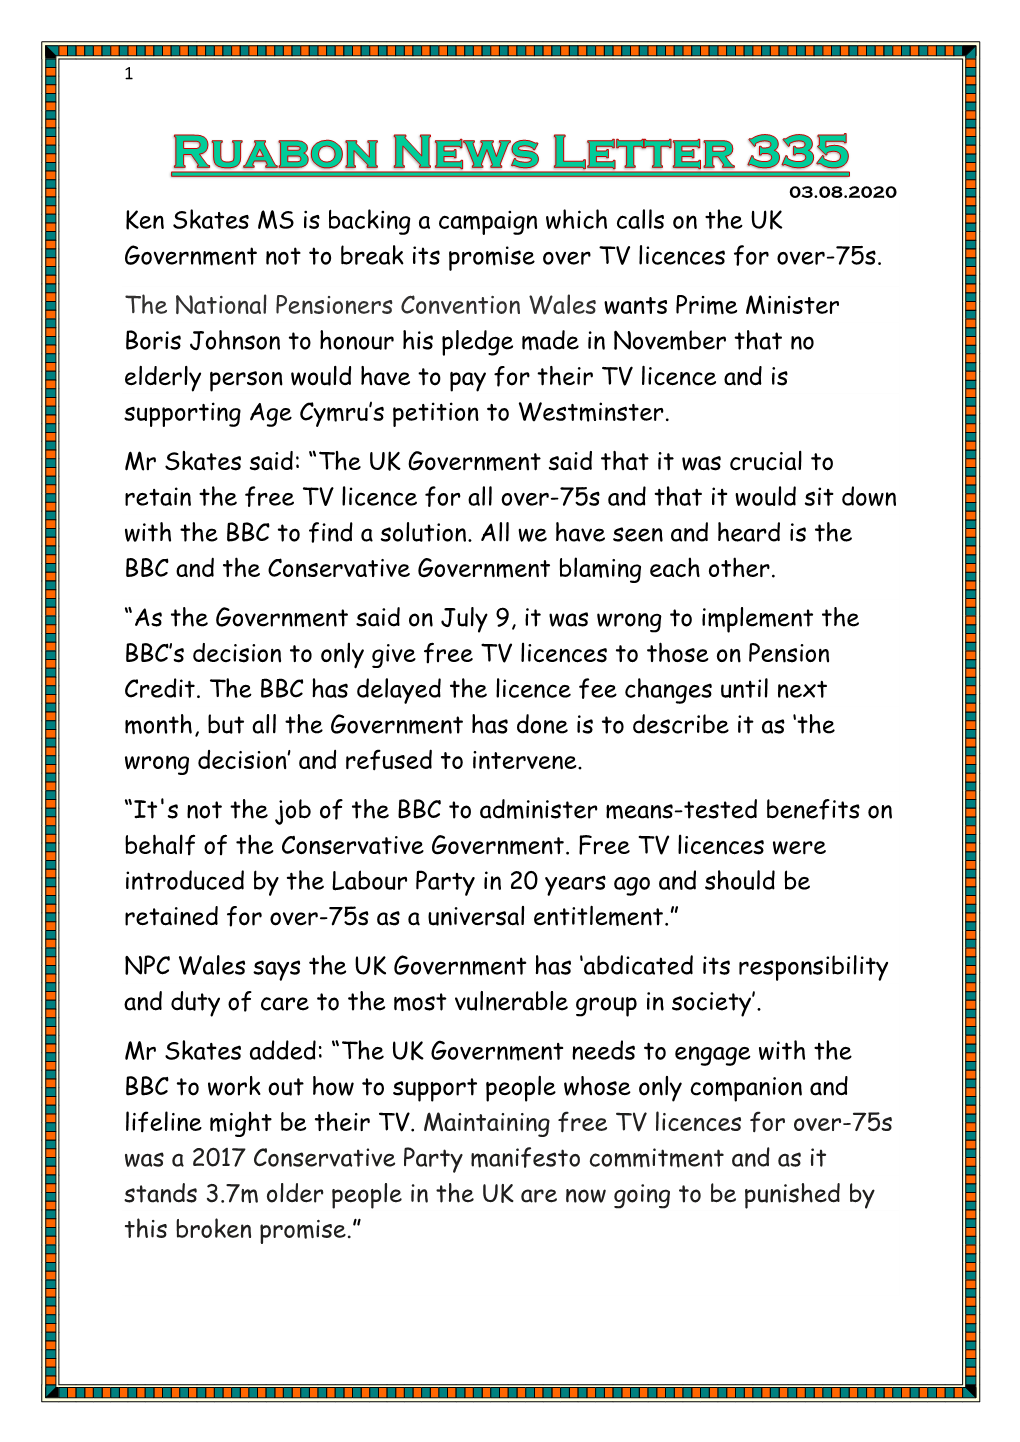 Ken Skates MS Is Backing a Campaign Which Calls on the UK Government Not to Break Its Promise Over TV Licences for Over-75S